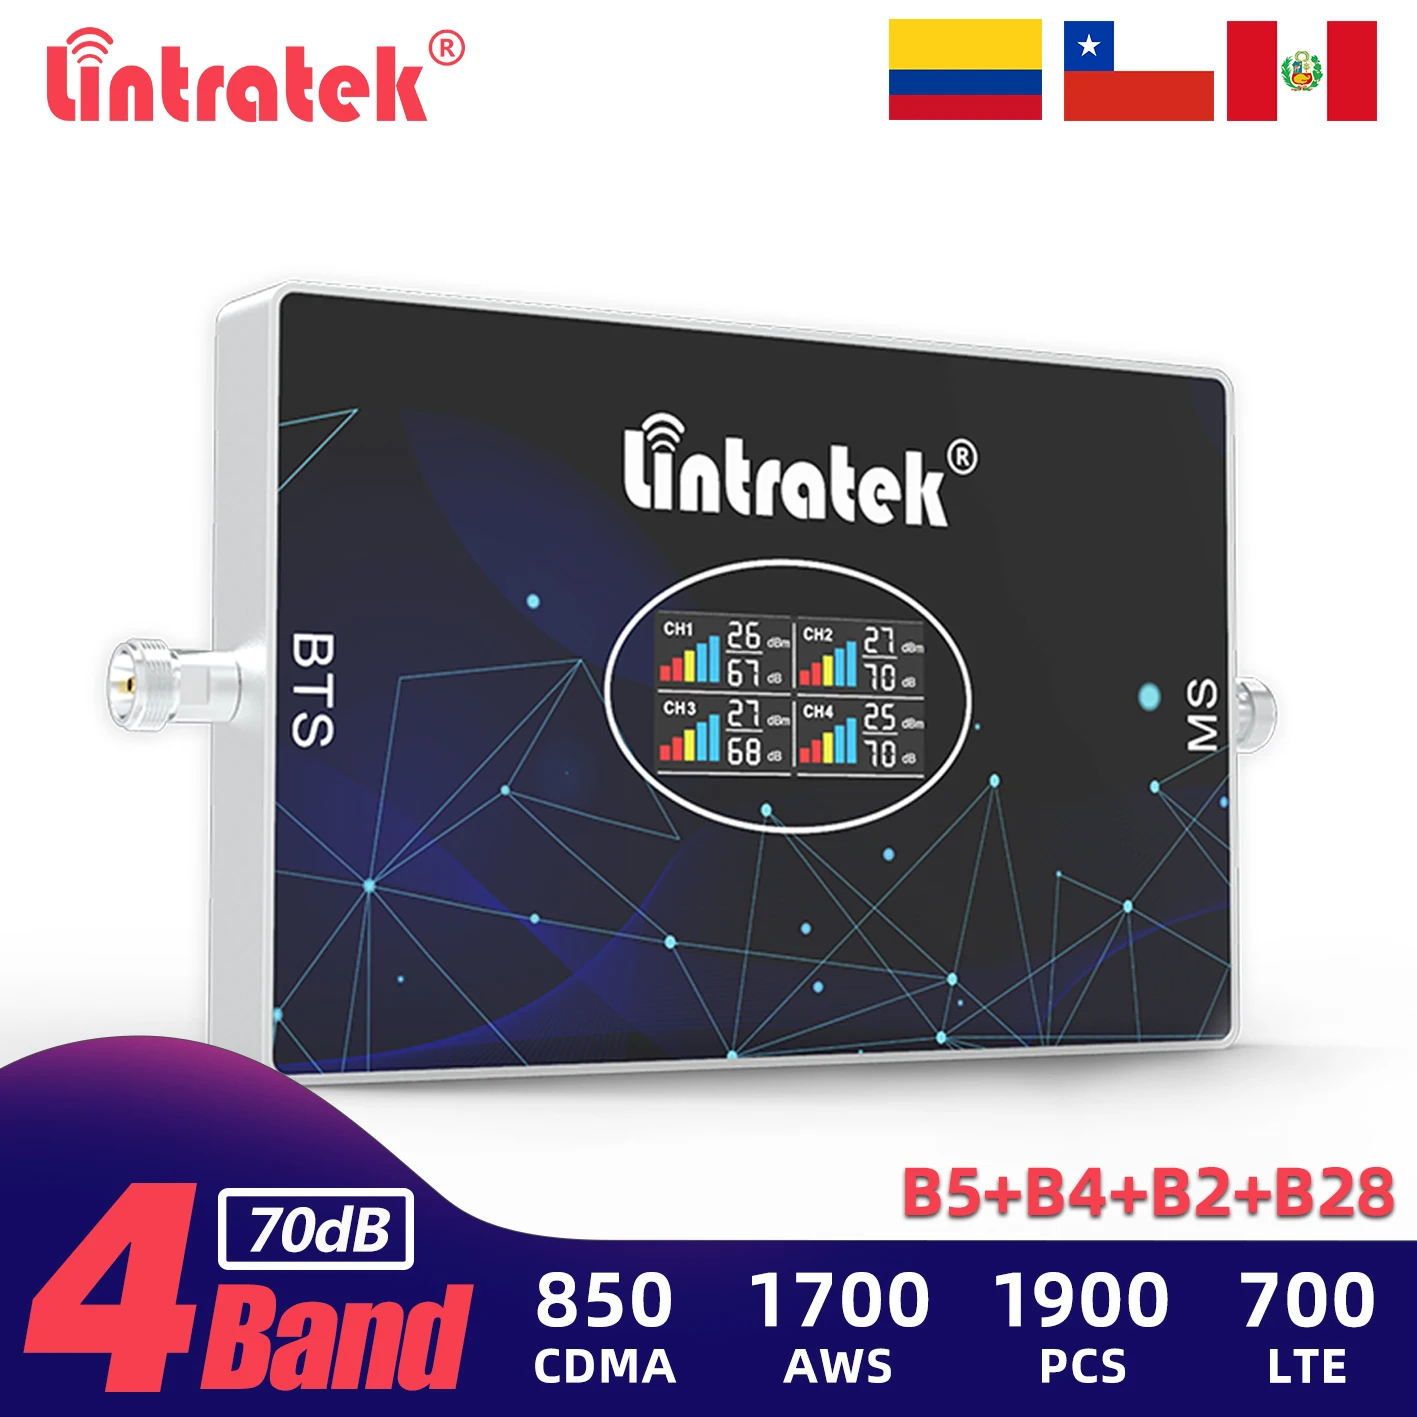 Lintratek Four-Band Signal Repeater 850 700 1900 1700 Band 28 Cellular Booster 2G GSM 3G 4G LTE Cell Phone Network Amplifier cell phone signal repeater 2g 3g 4g mobile phone amplifier signal booster 900 1800 2100mhz